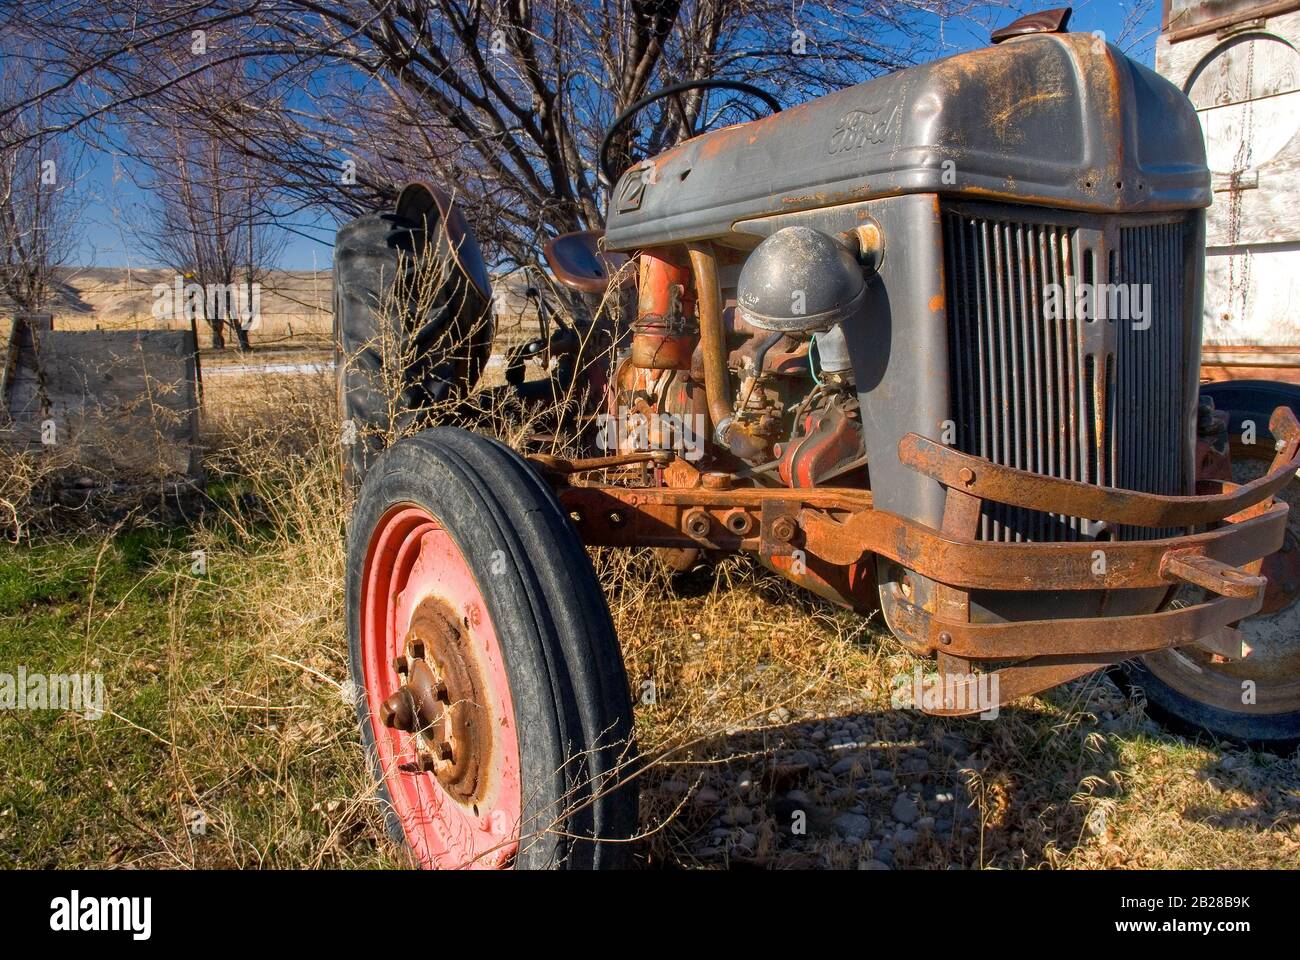 Old, Broken, Rusty For Tractor sits idle in the weeds on a Sunny Day Stock Photo